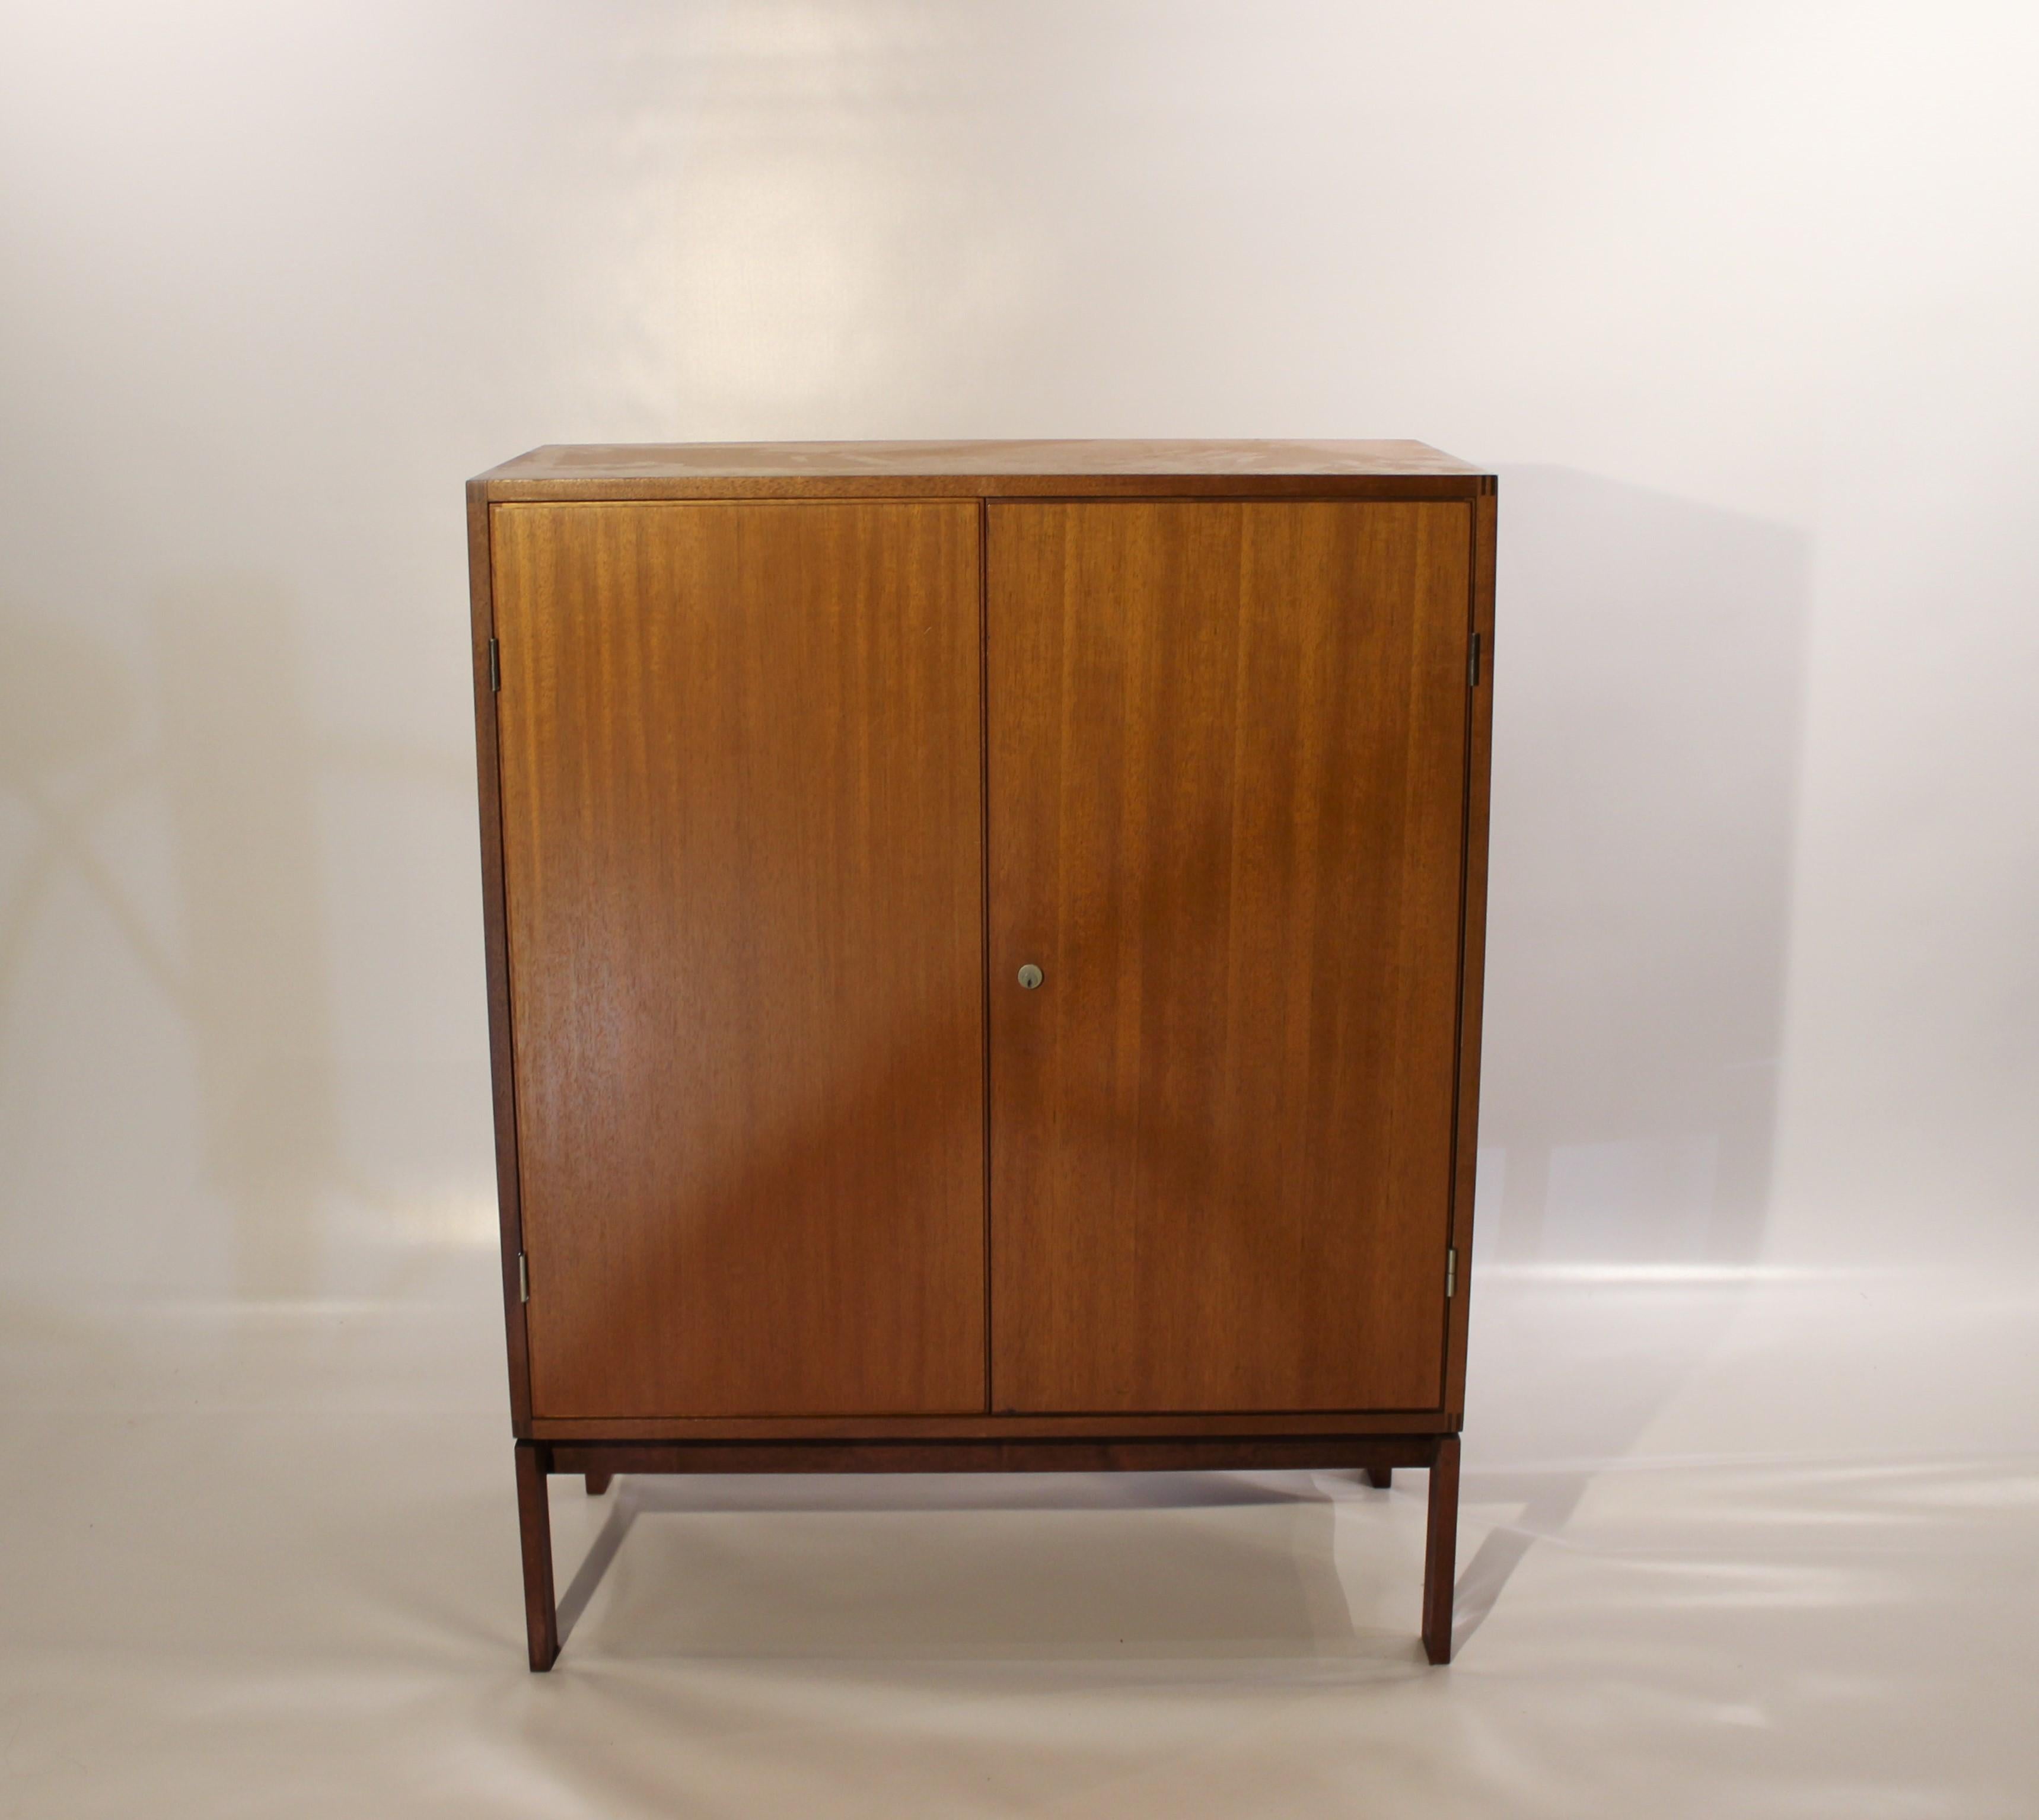 Tall cabinet in light mahogany, model M40, designed by Henning Jensen and Torben Waleur and manufactured by Munch Denmark in the 1960s. We have 3 pieces in stock.